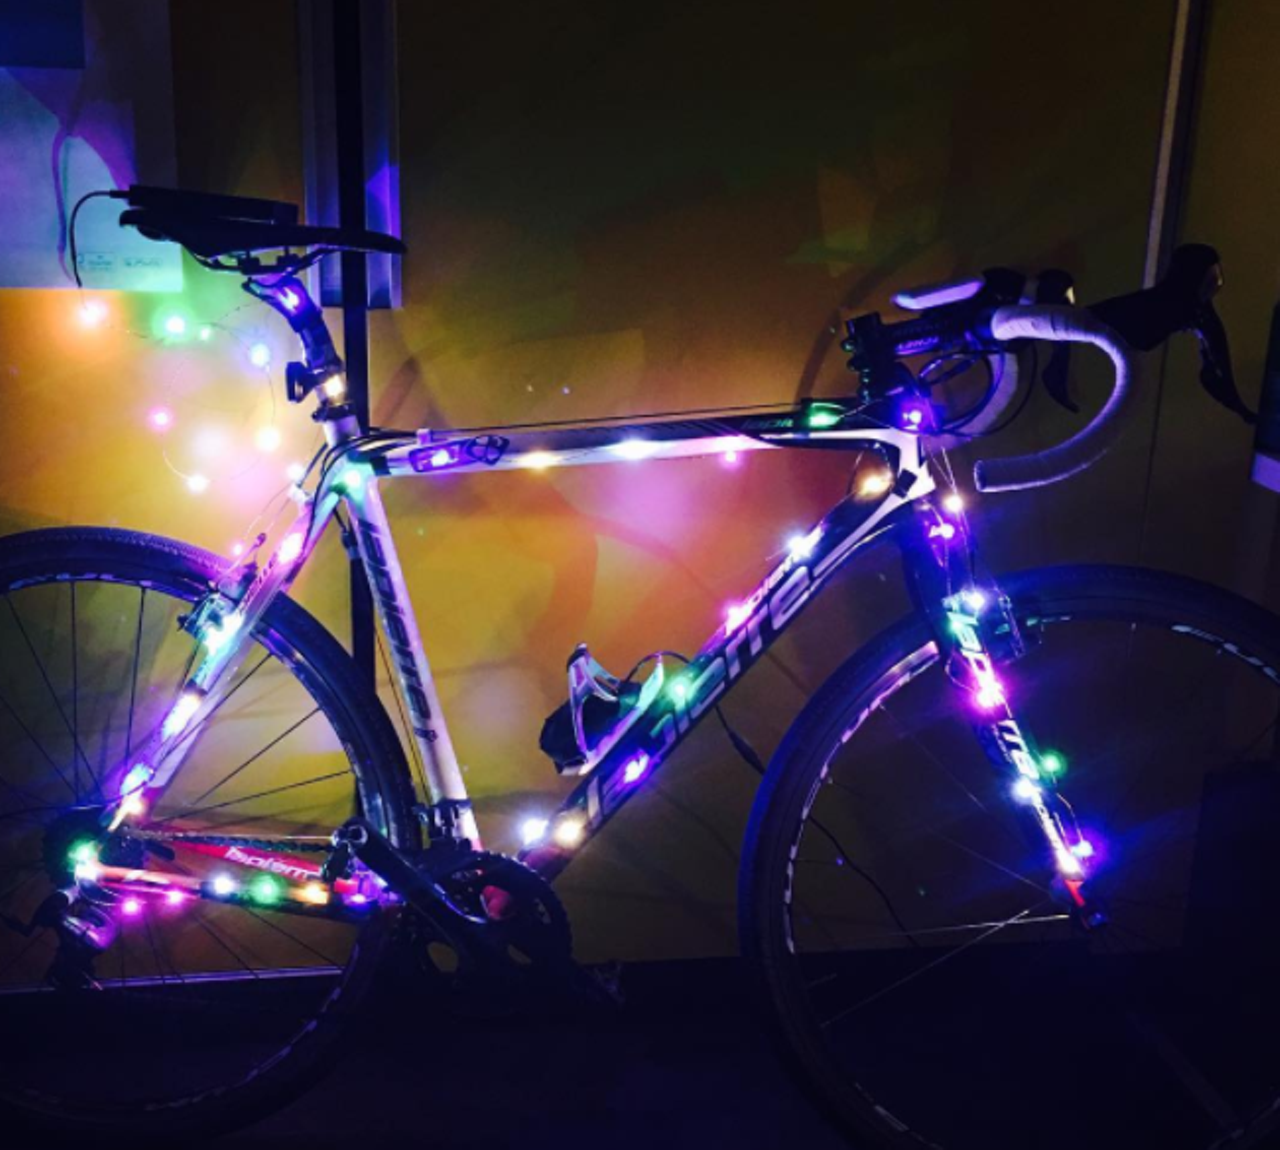 Christmas lights on bikes start to emerge, which are both functional and festive 
Photo via norbertgoltl/Instagram